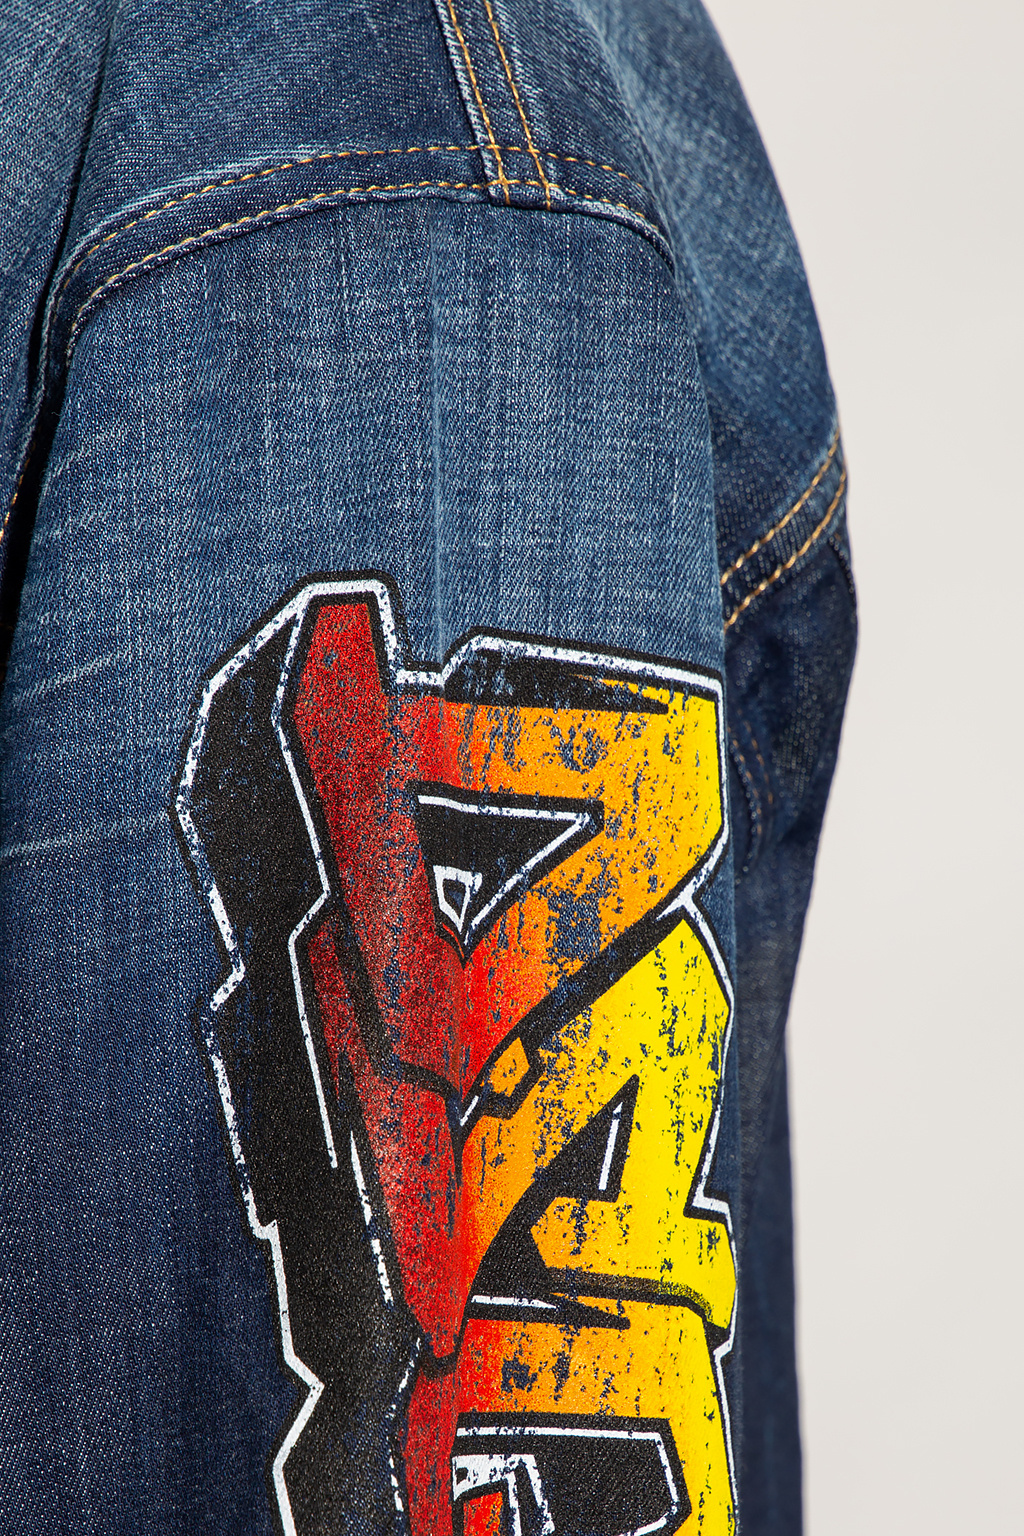 Dsquared2 ‘Wall Tag’ denim high-end jacket